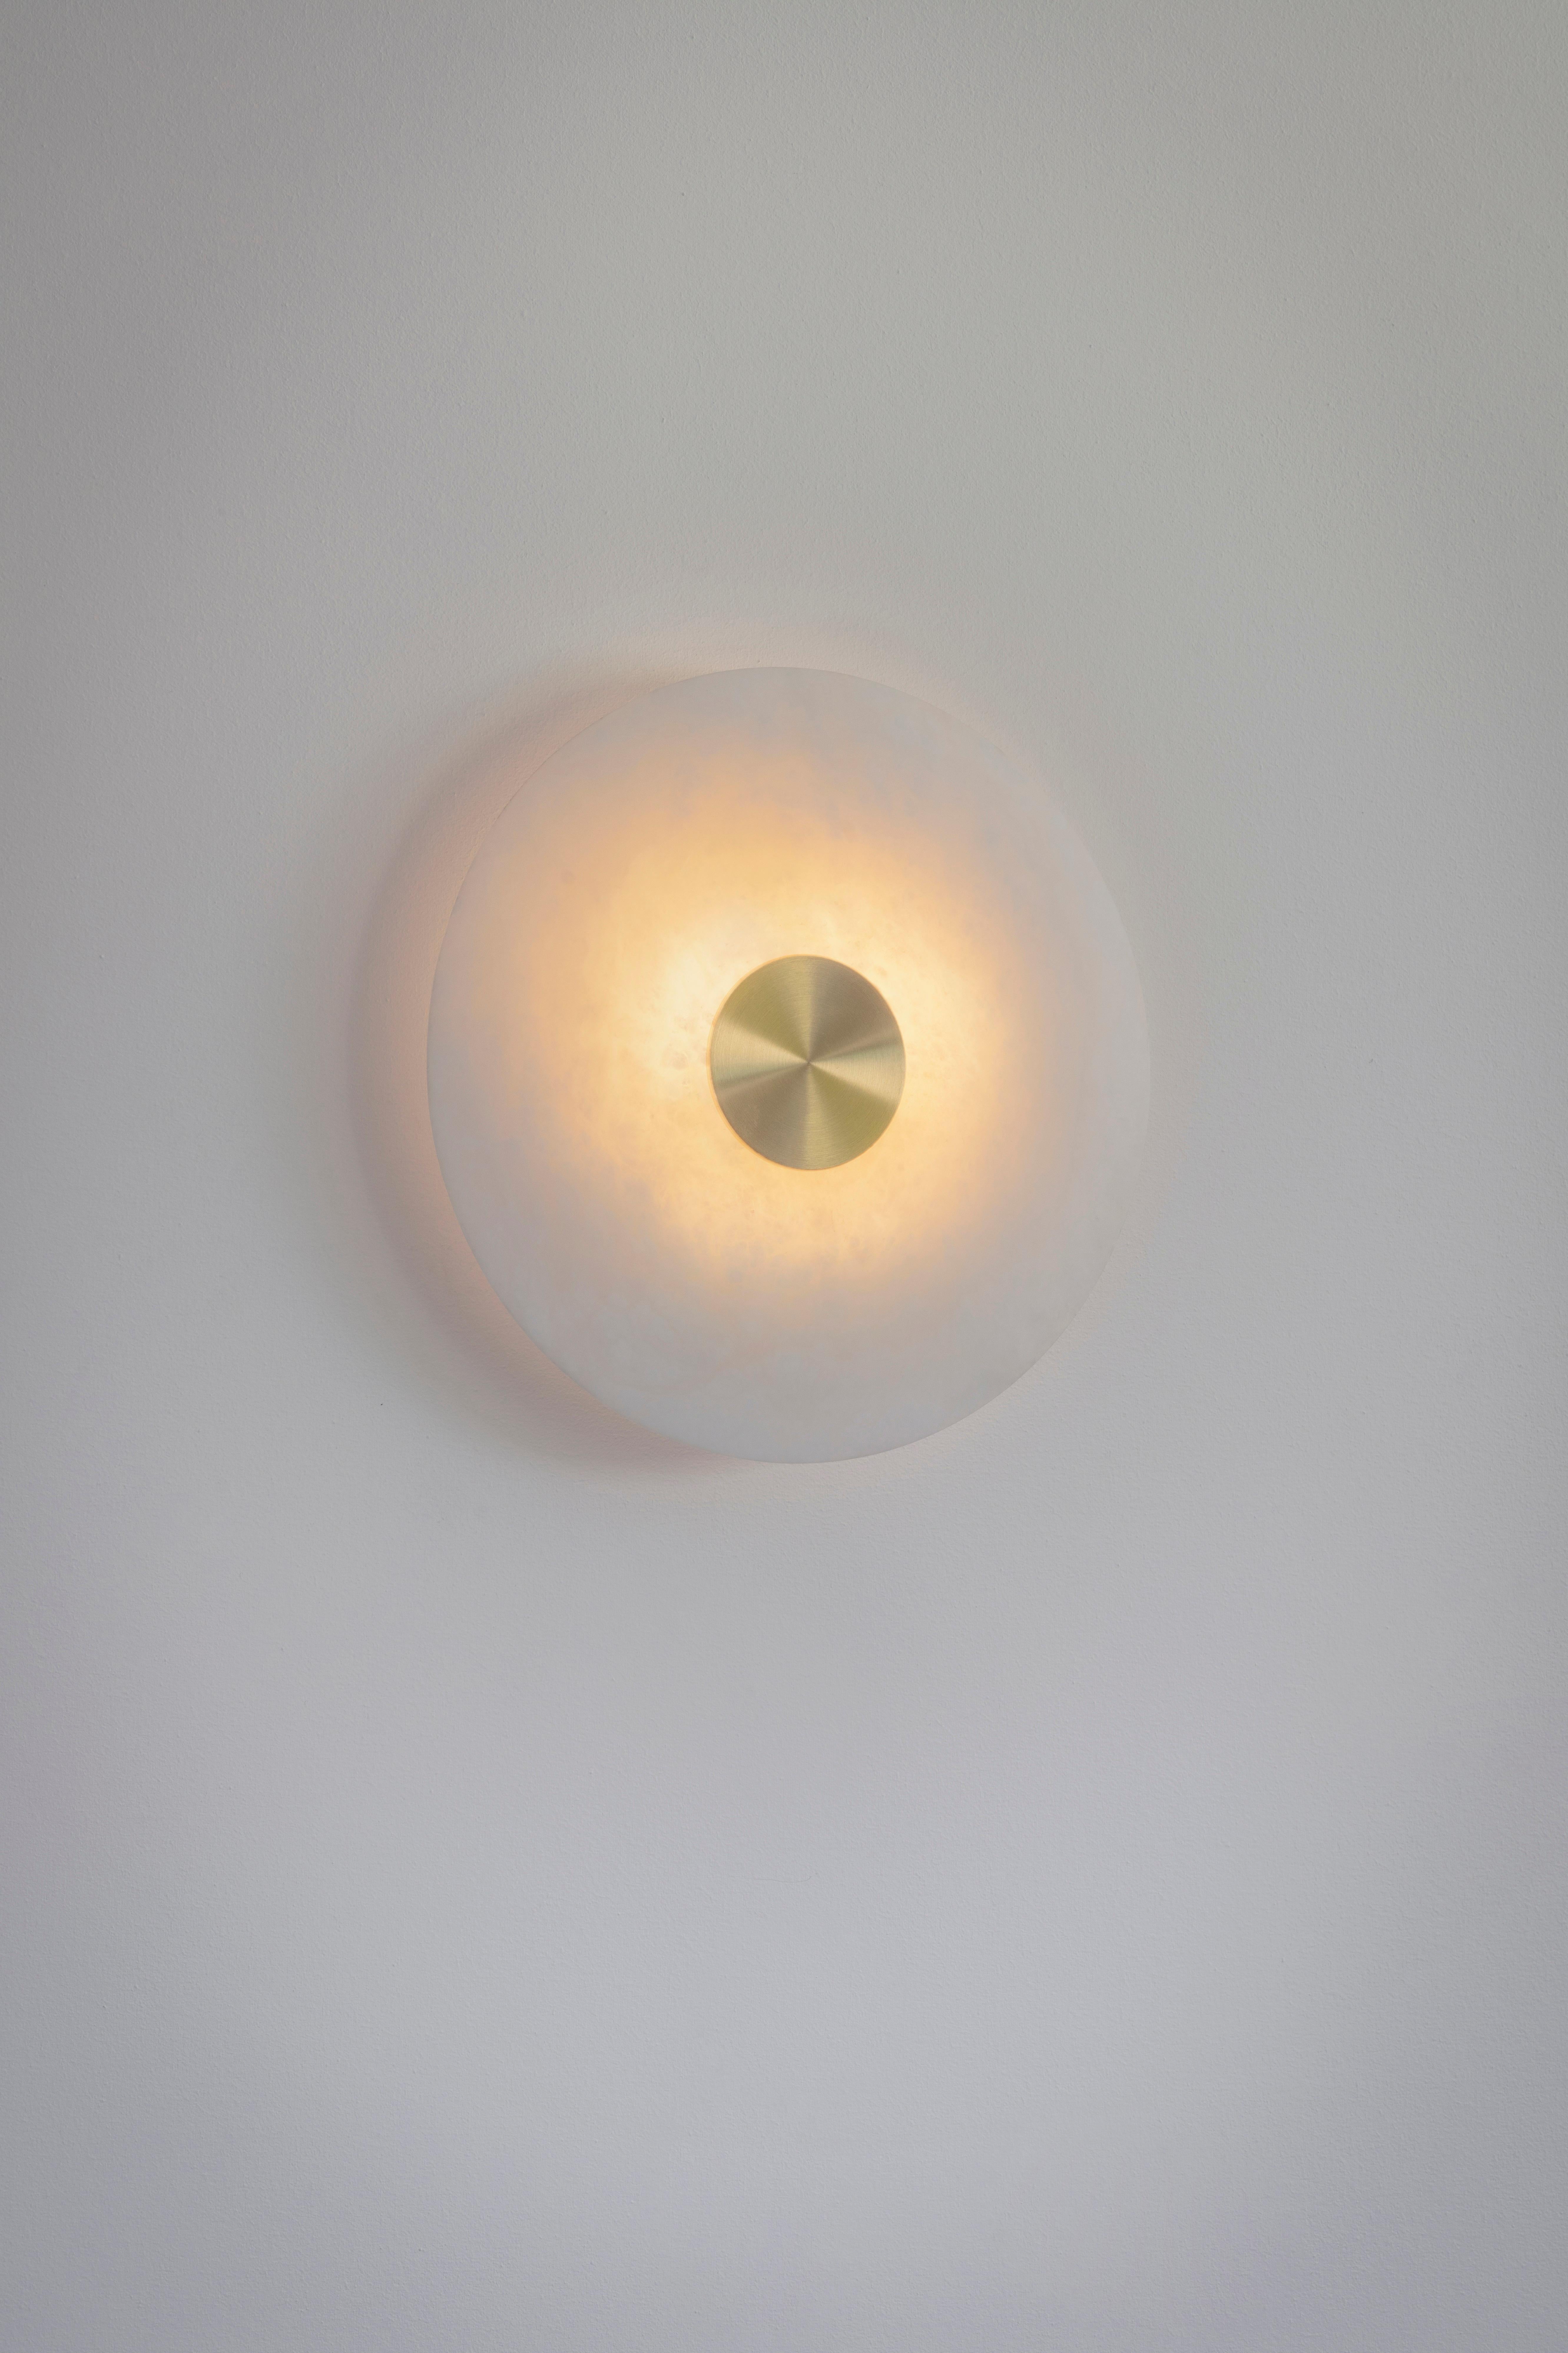 Bide large wall light by Bert Frank
Dimensions: H 36 x D 6.5 cm
Materials: brass and alabaster

Available finishes: Brass and Alabaster
All our lamps can be wired according to each country. If sold to the USA it will be wired for the USA for